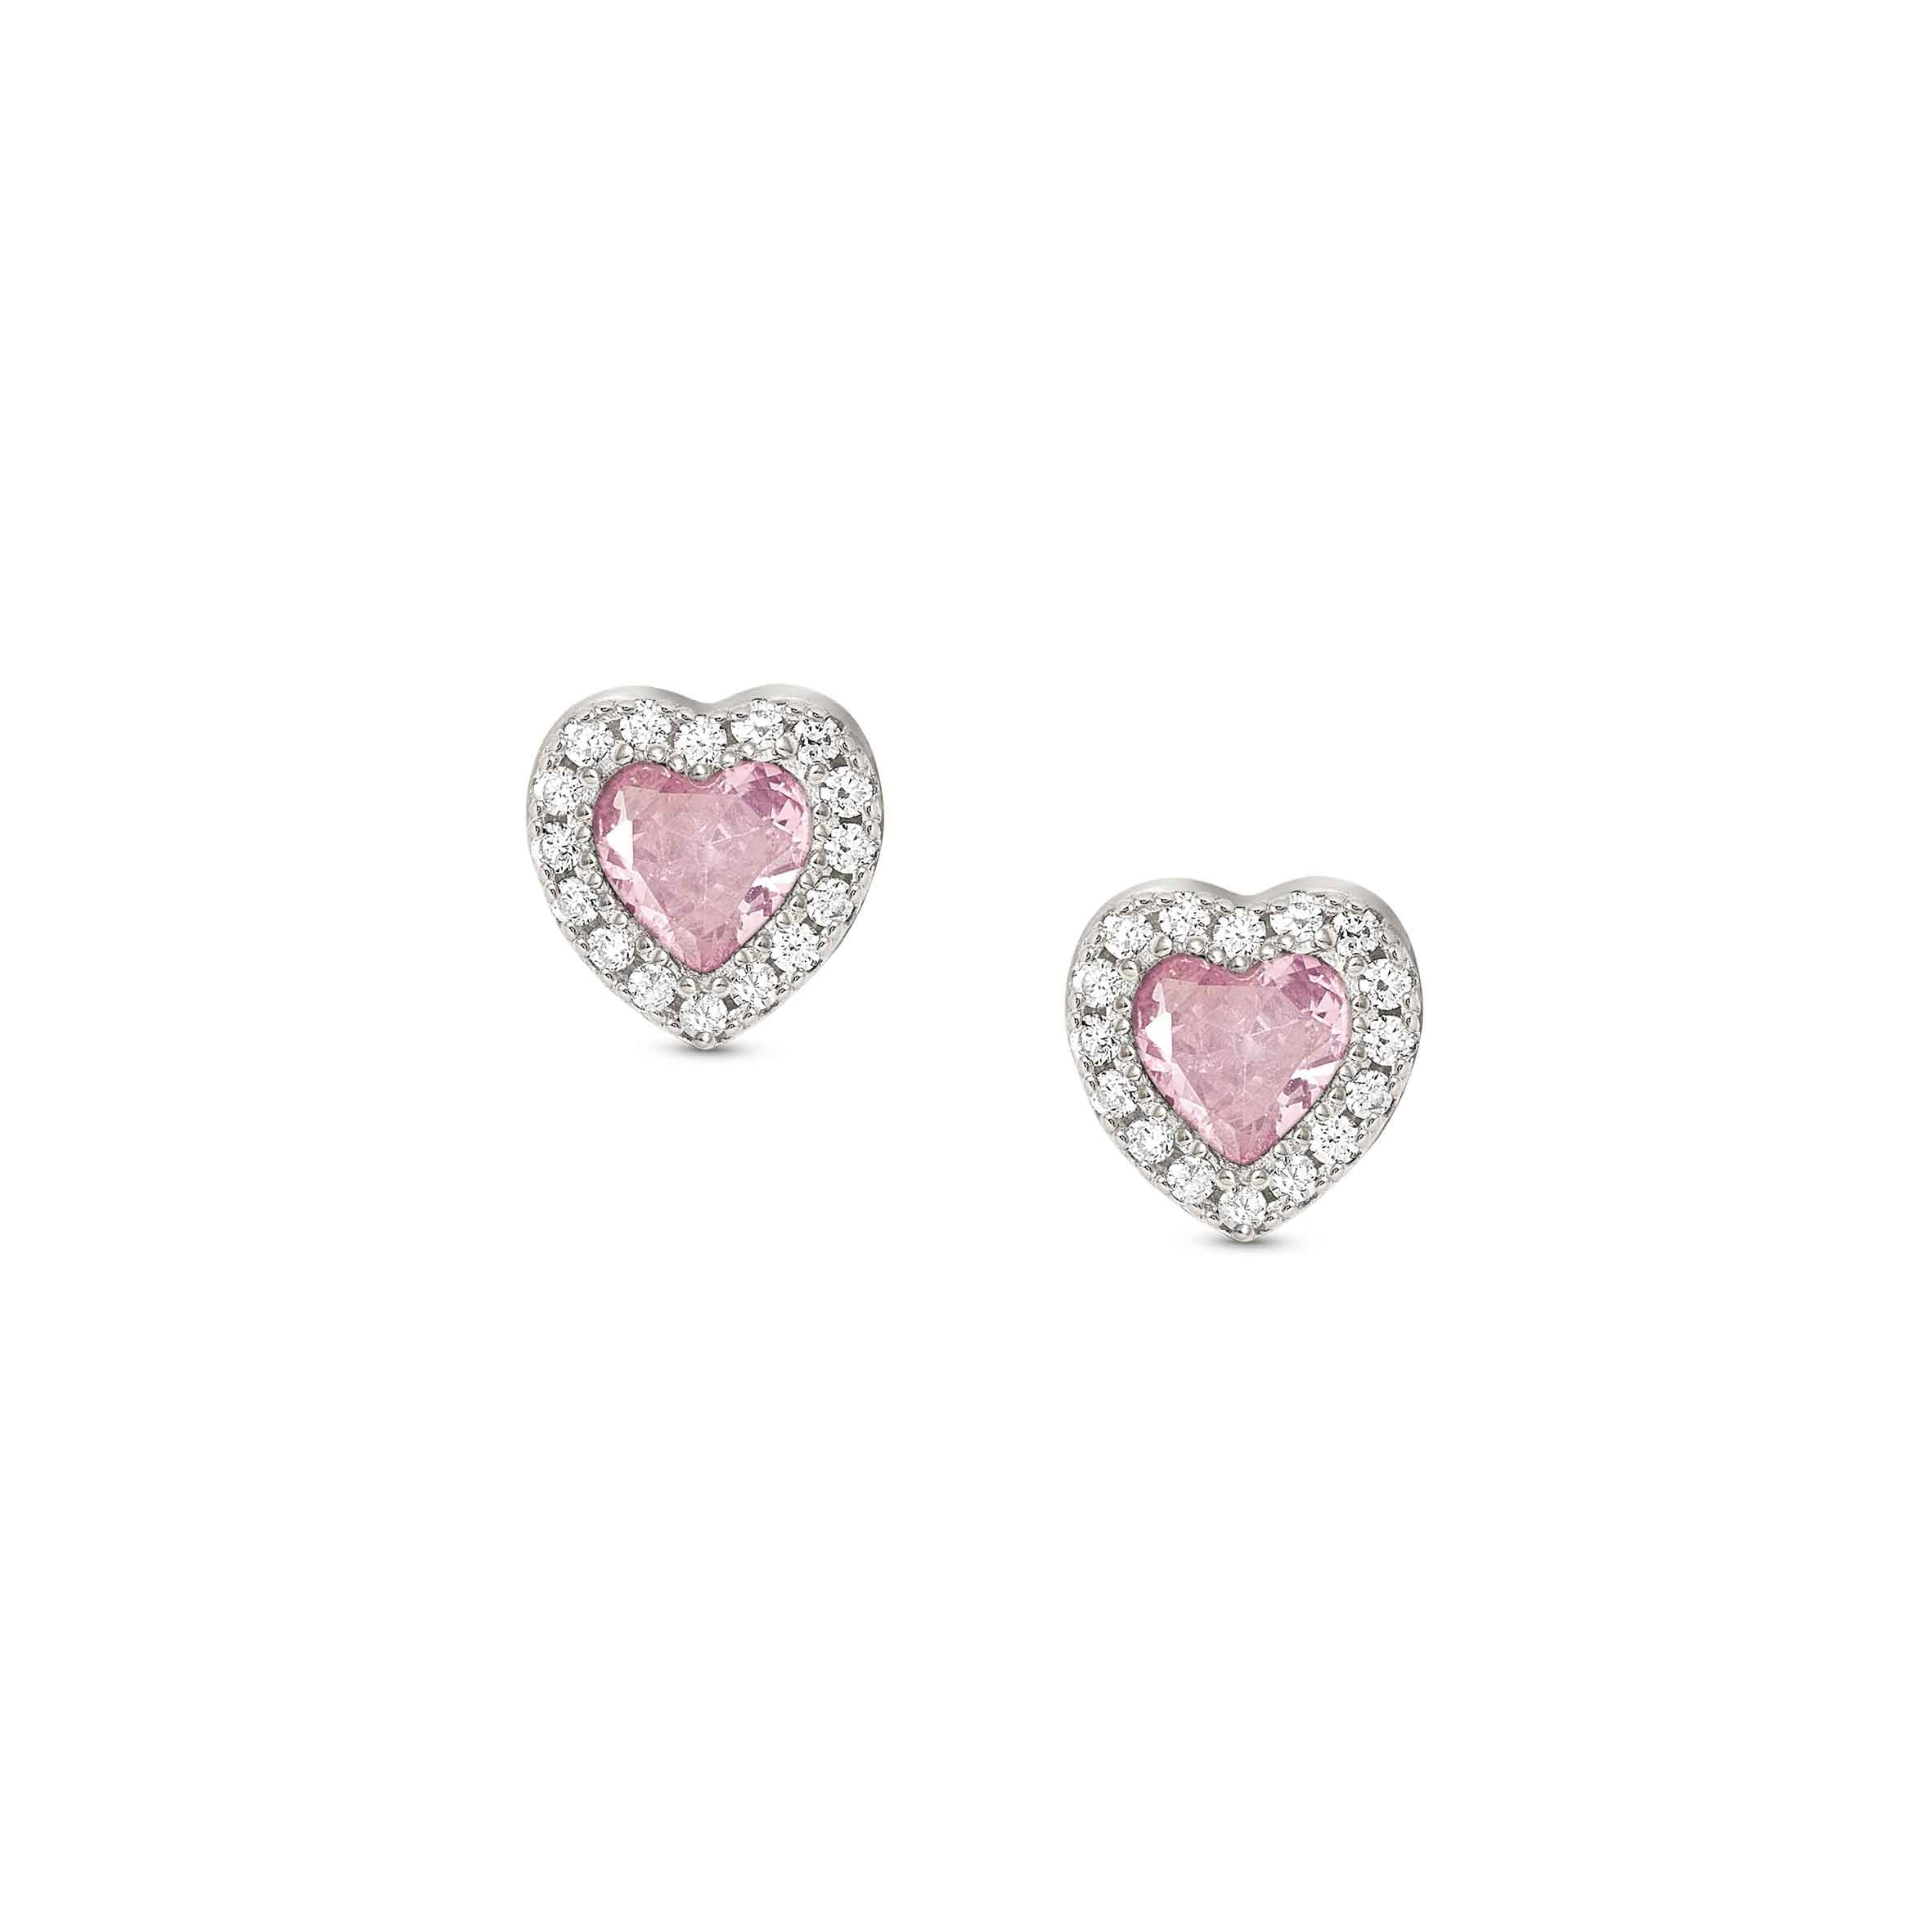 Nomination AllMyLove Pink Earrings